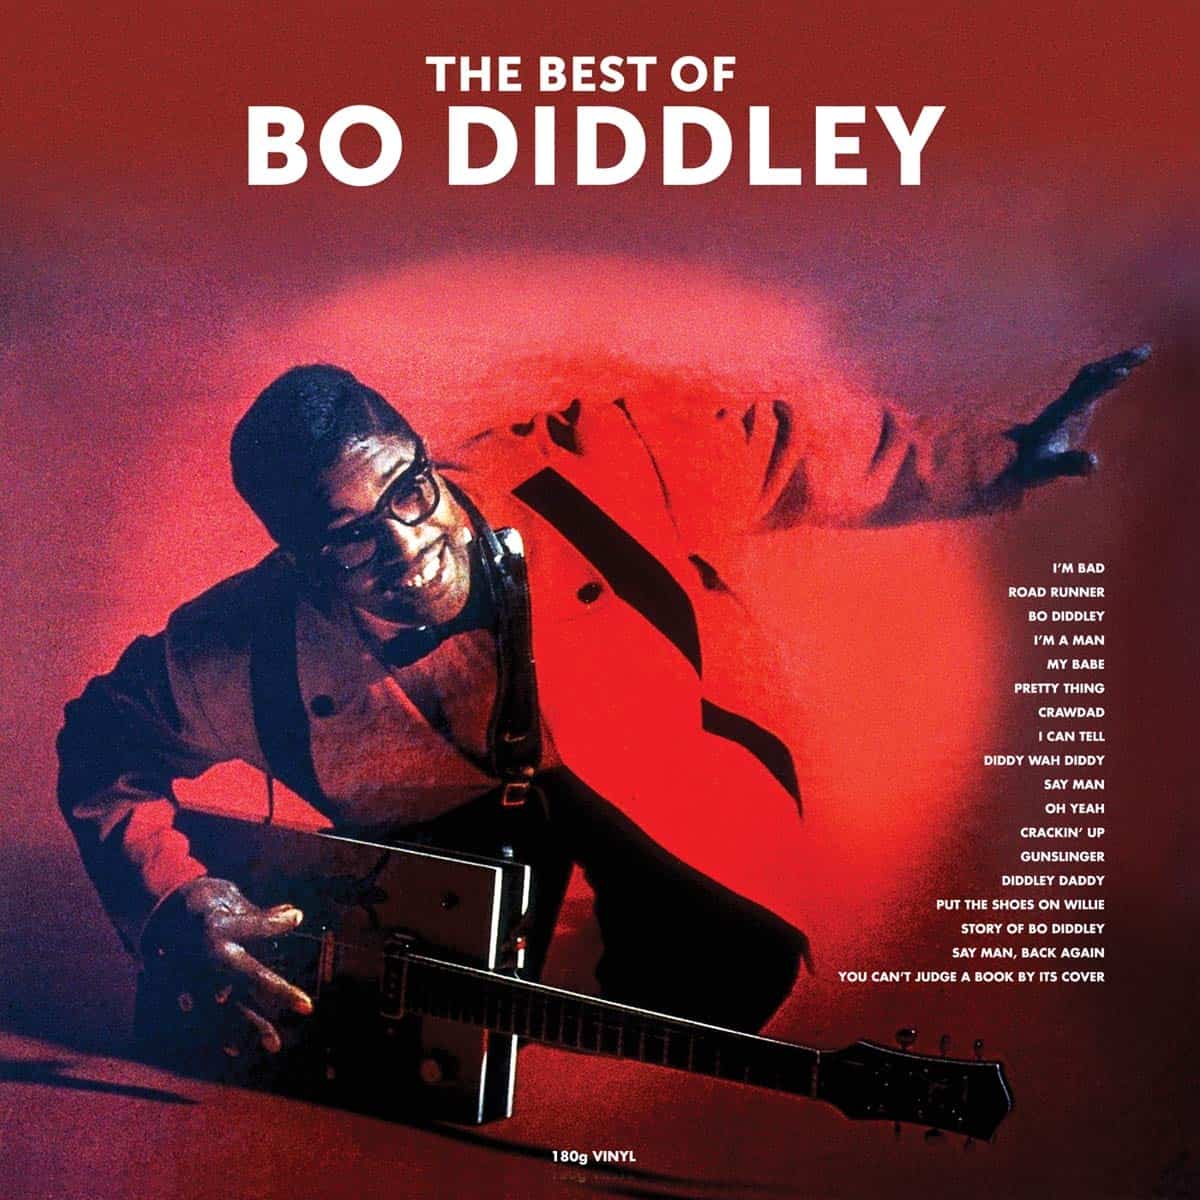 The-Best-Of-Bo-Diddley-vinyl-record-album-front